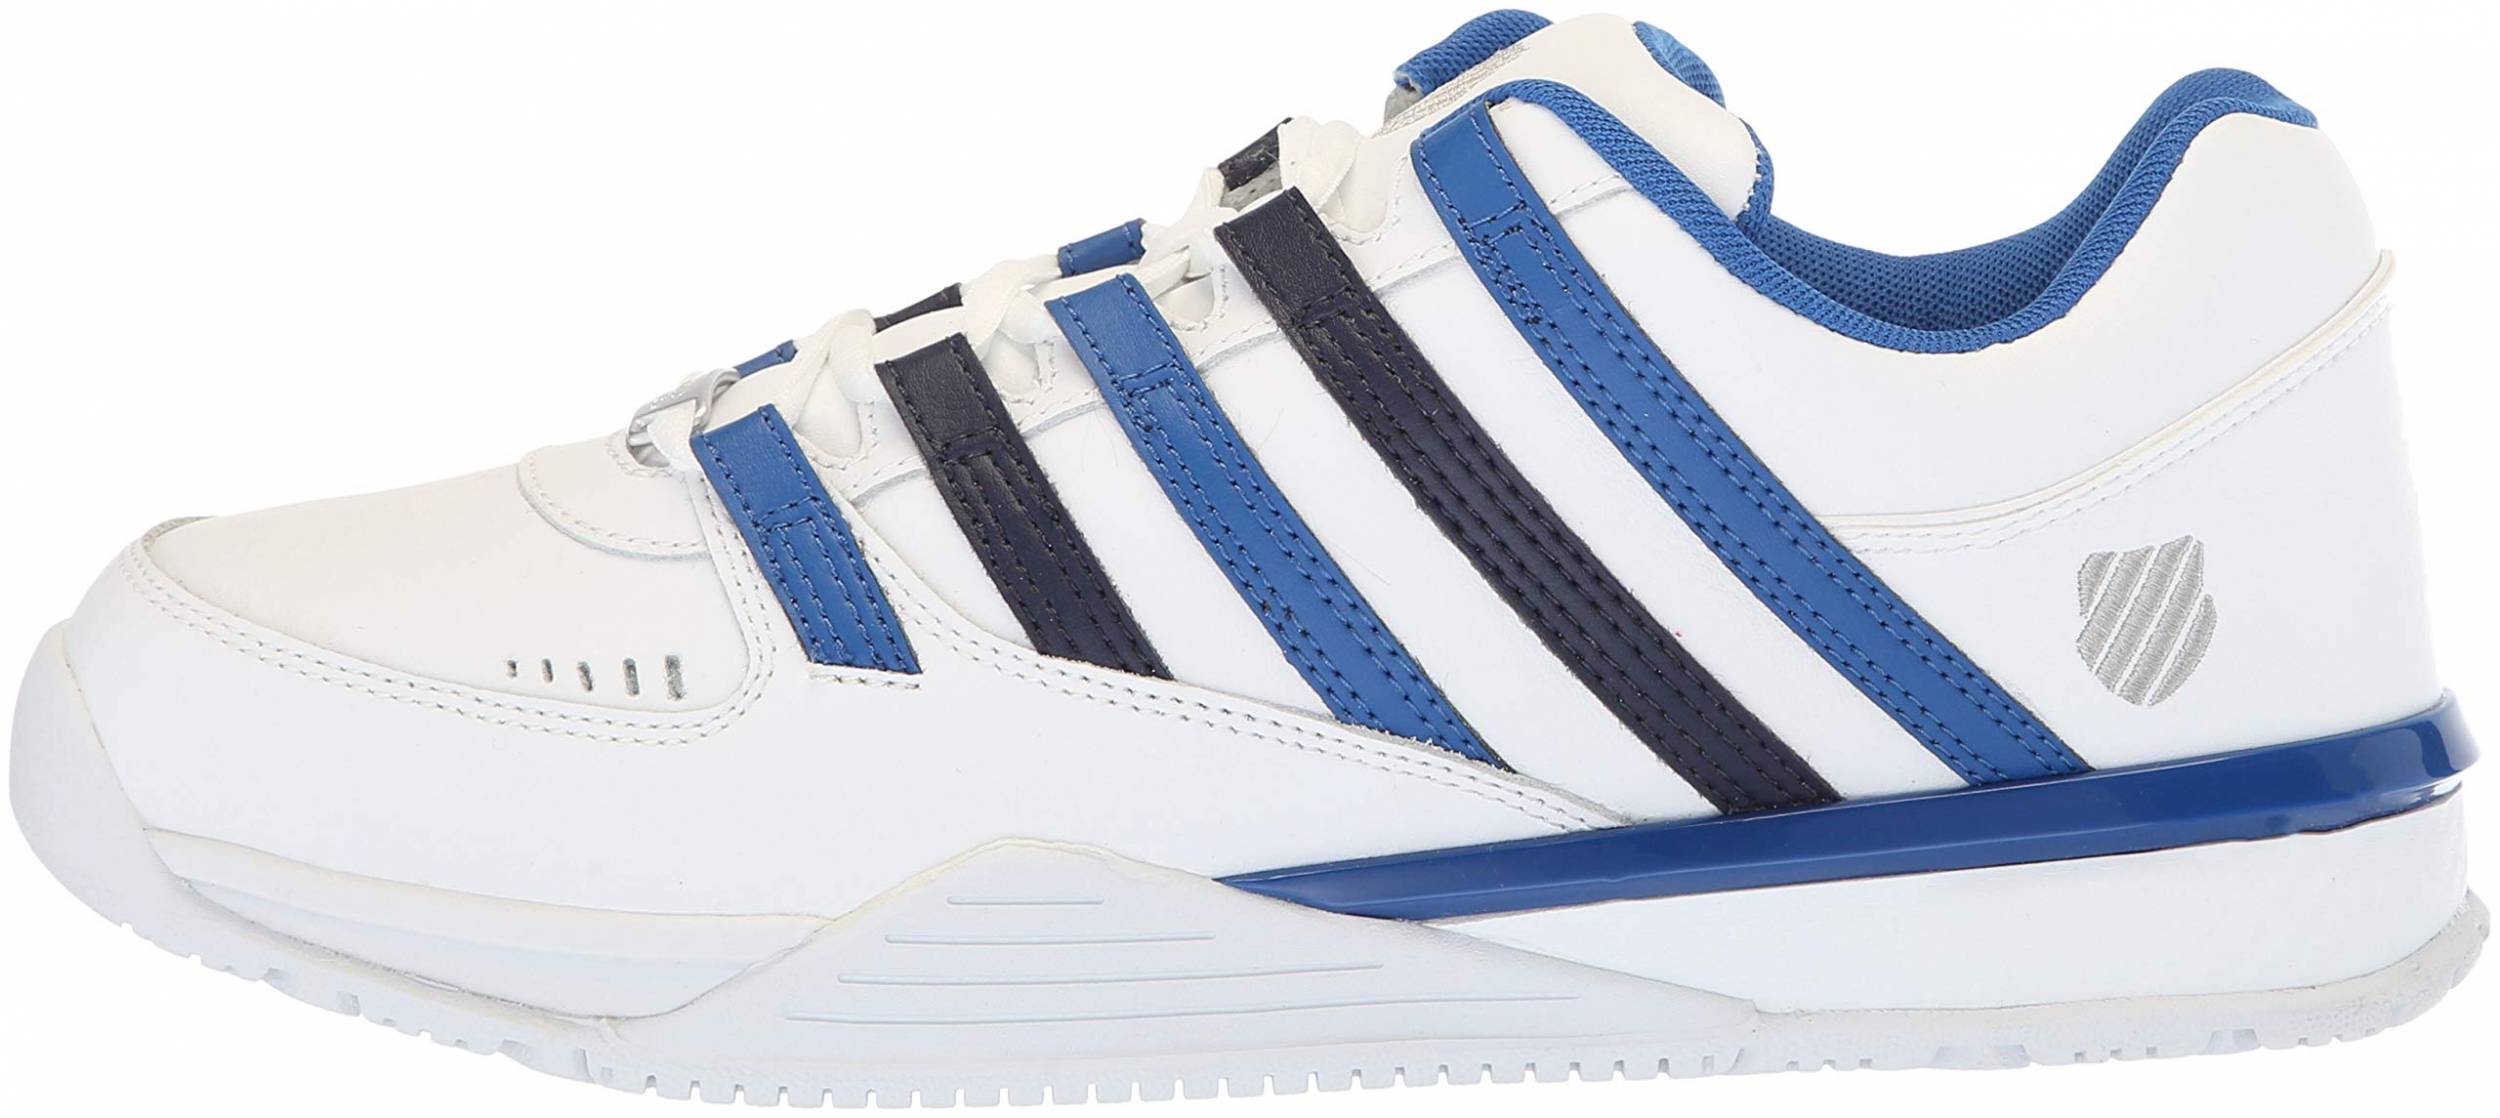 k swiss blue and white